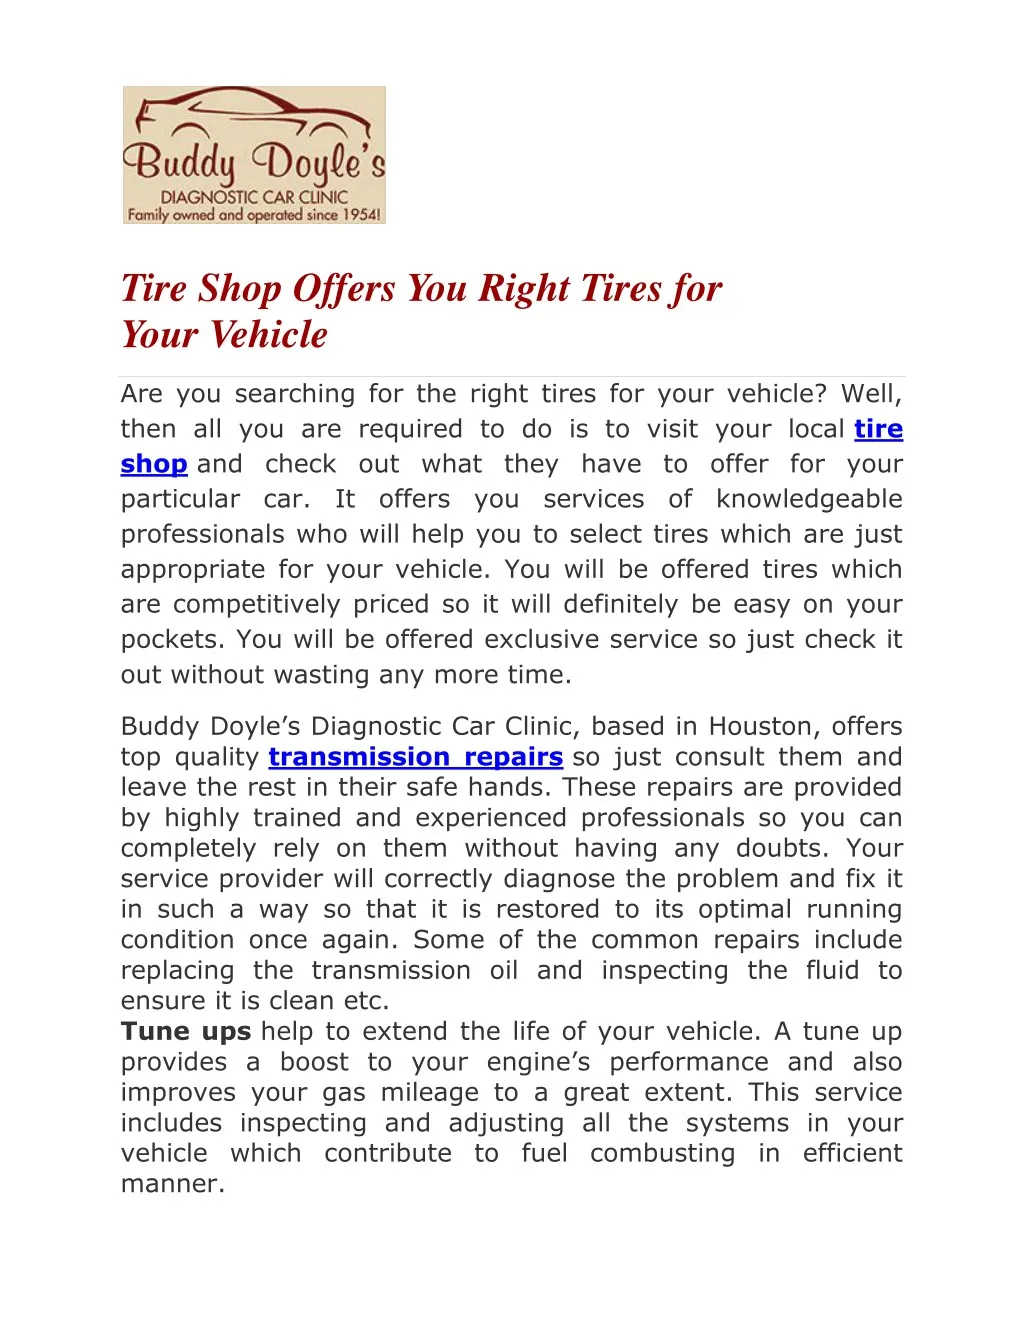 tire shop offers you right tires for your vehicle